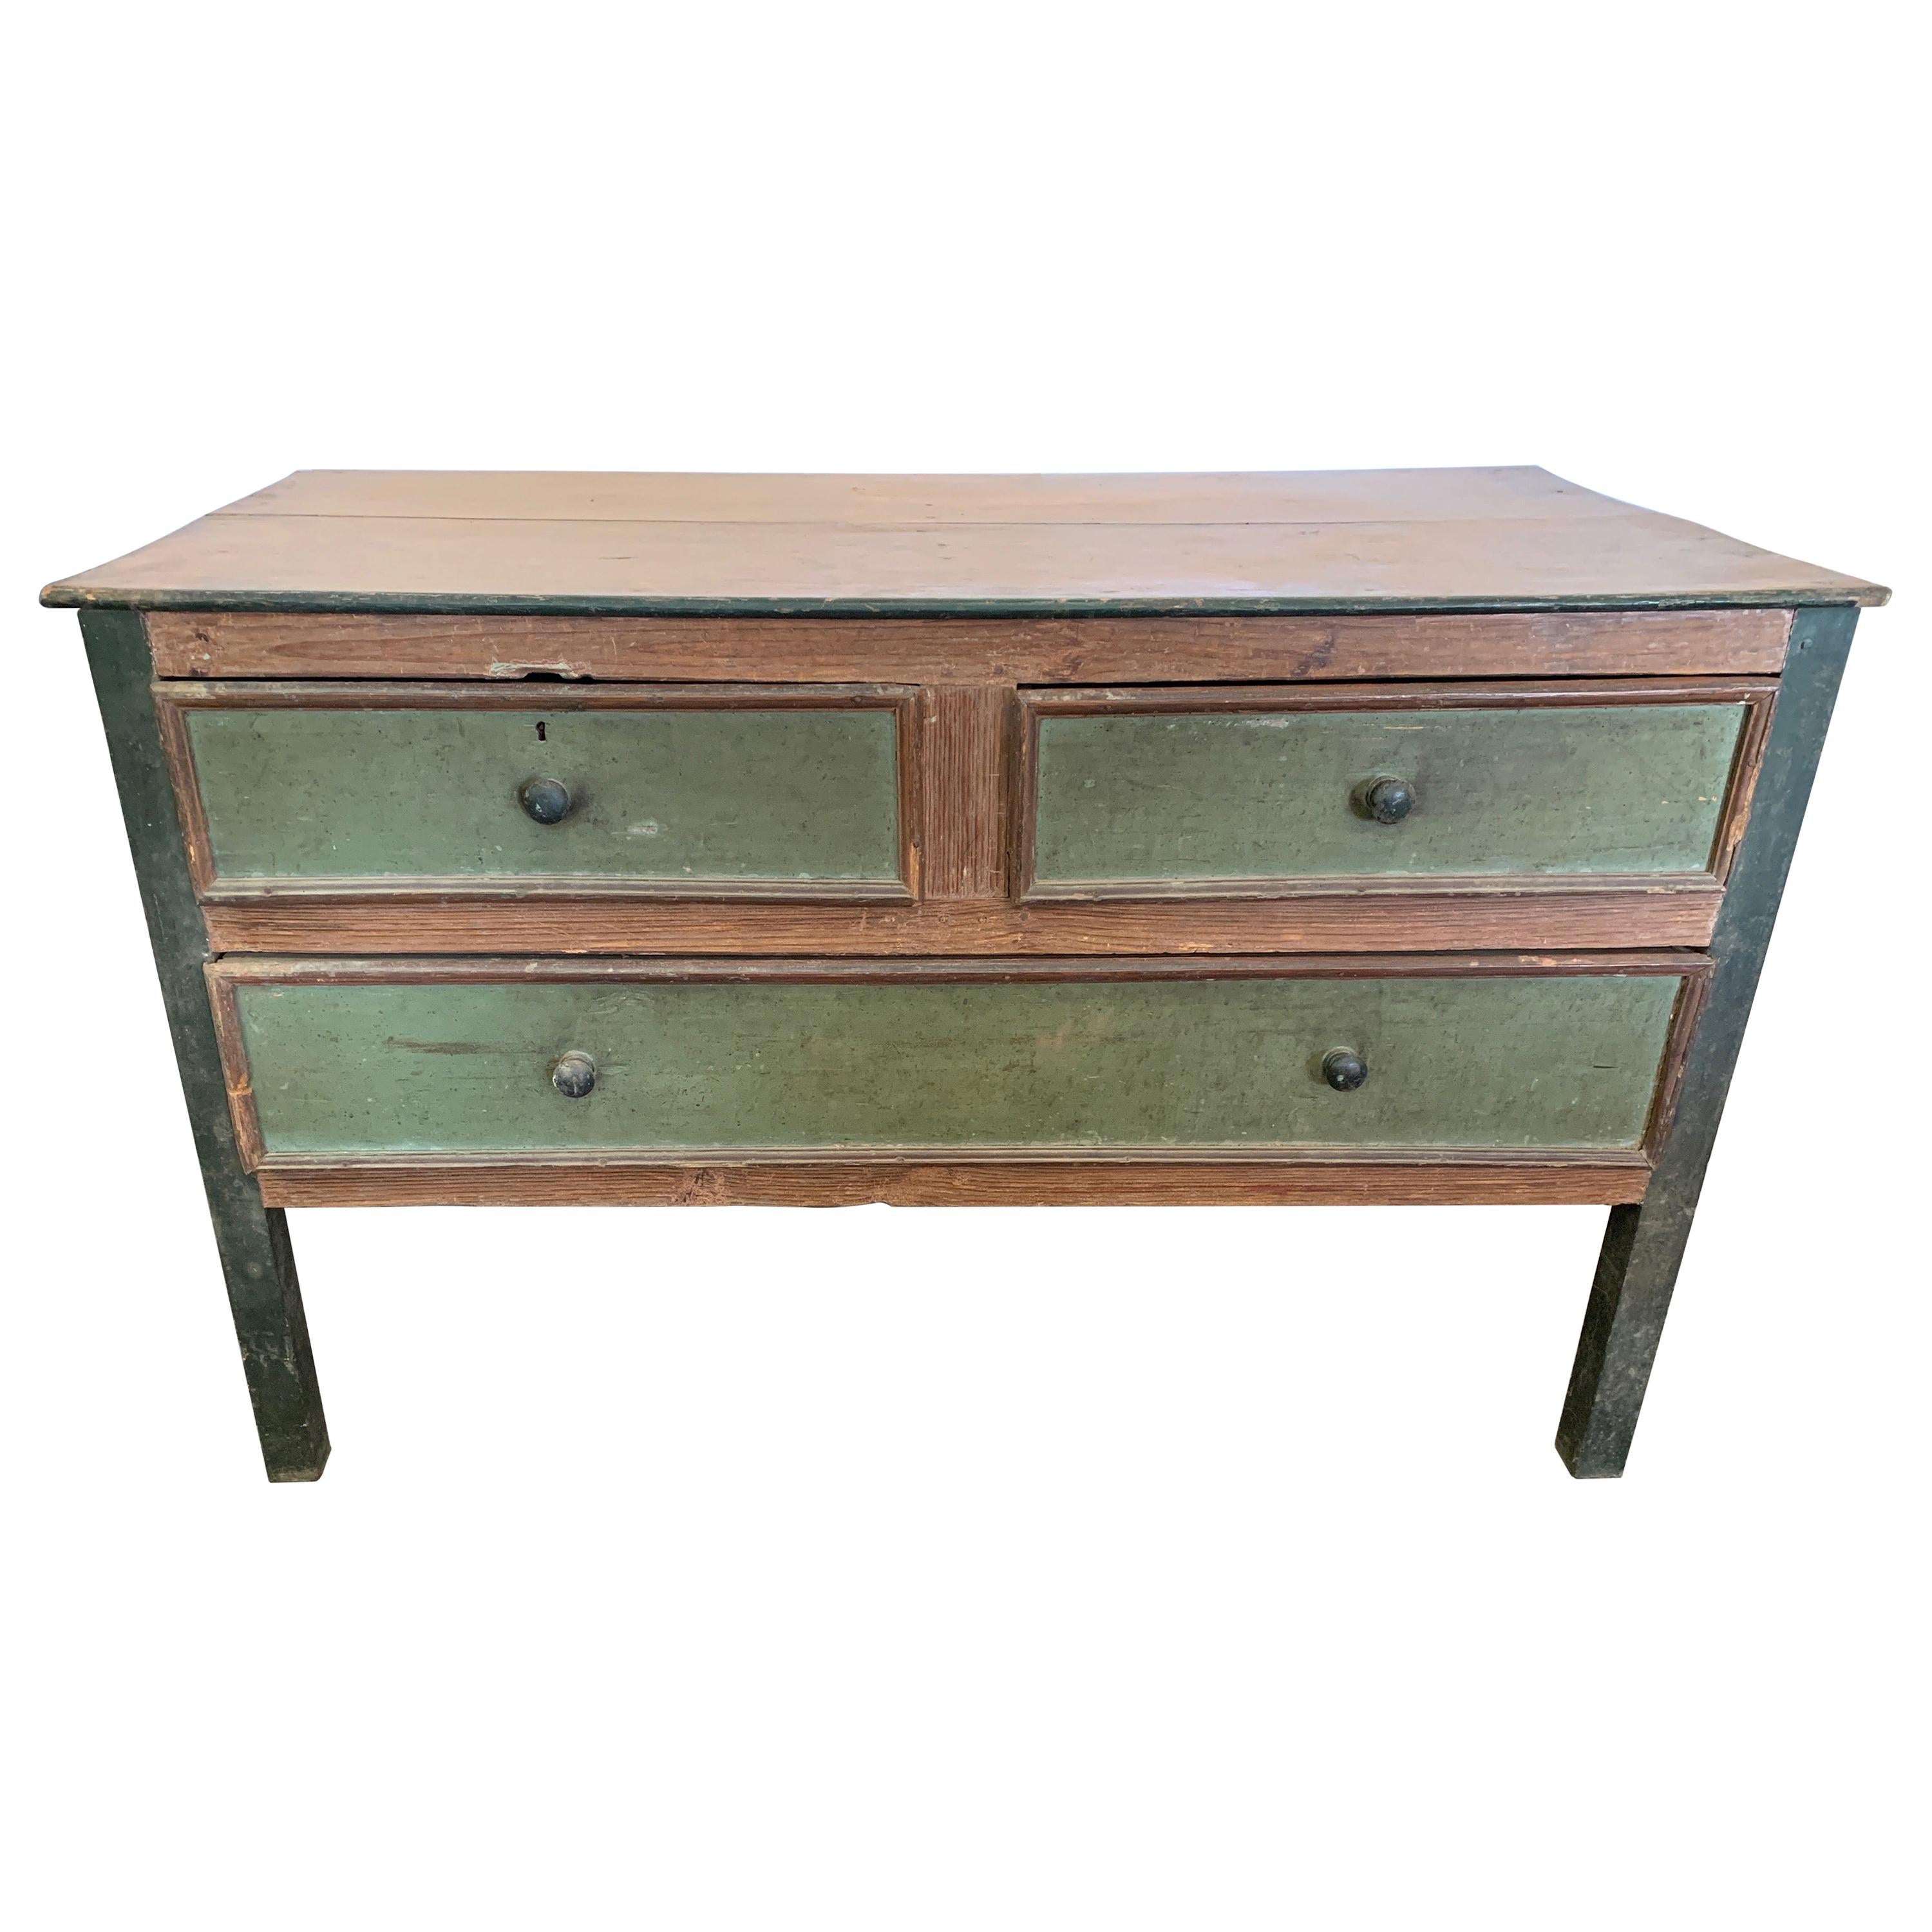 Spanish 18th Century Painted Sacristy Chest with Deep Drawers